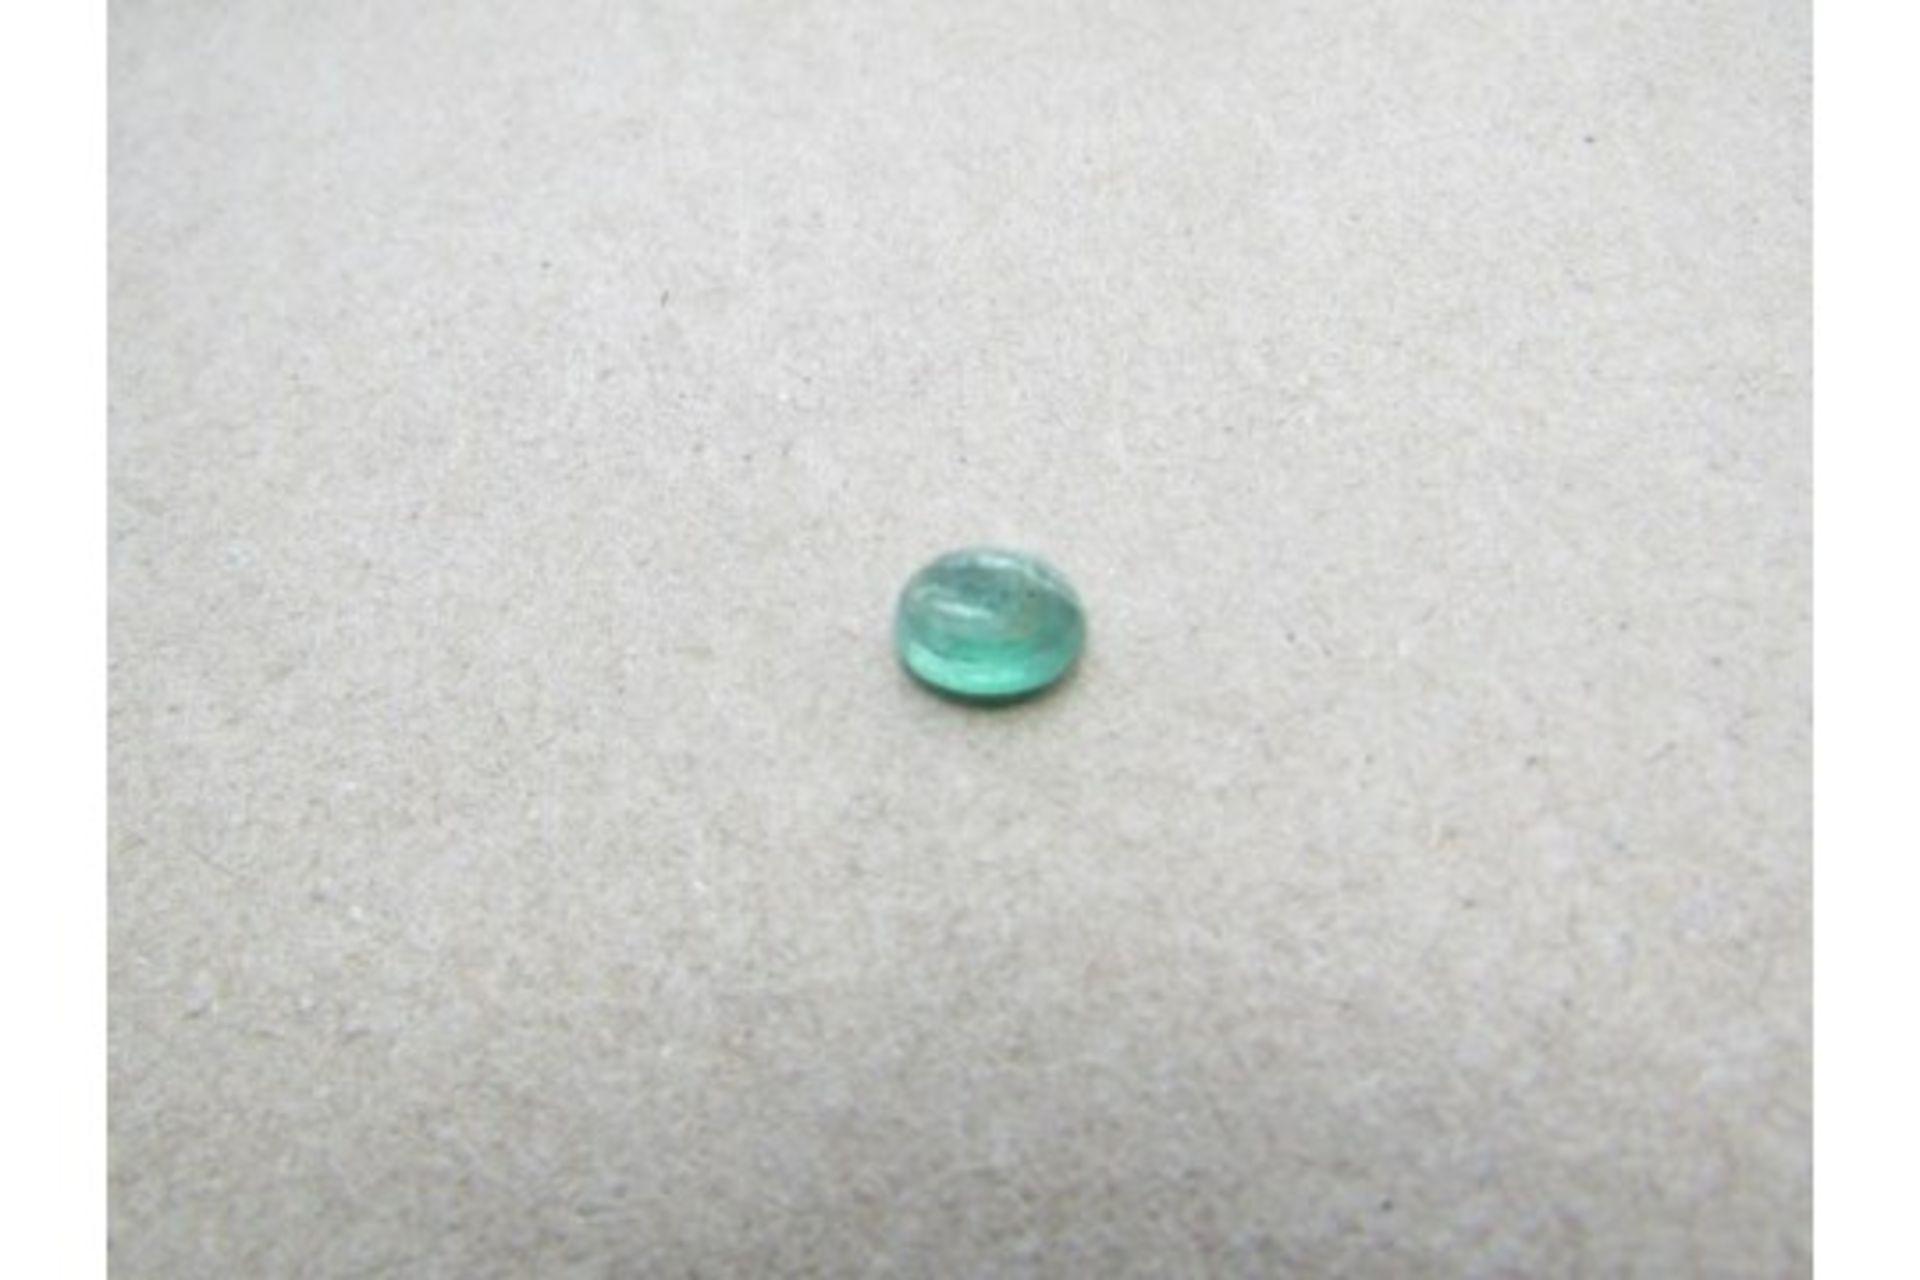 Natural Emerald 0.77 Carat Average retail value Gemstone type: Emerald Weight: 0.77 cts. Colour: